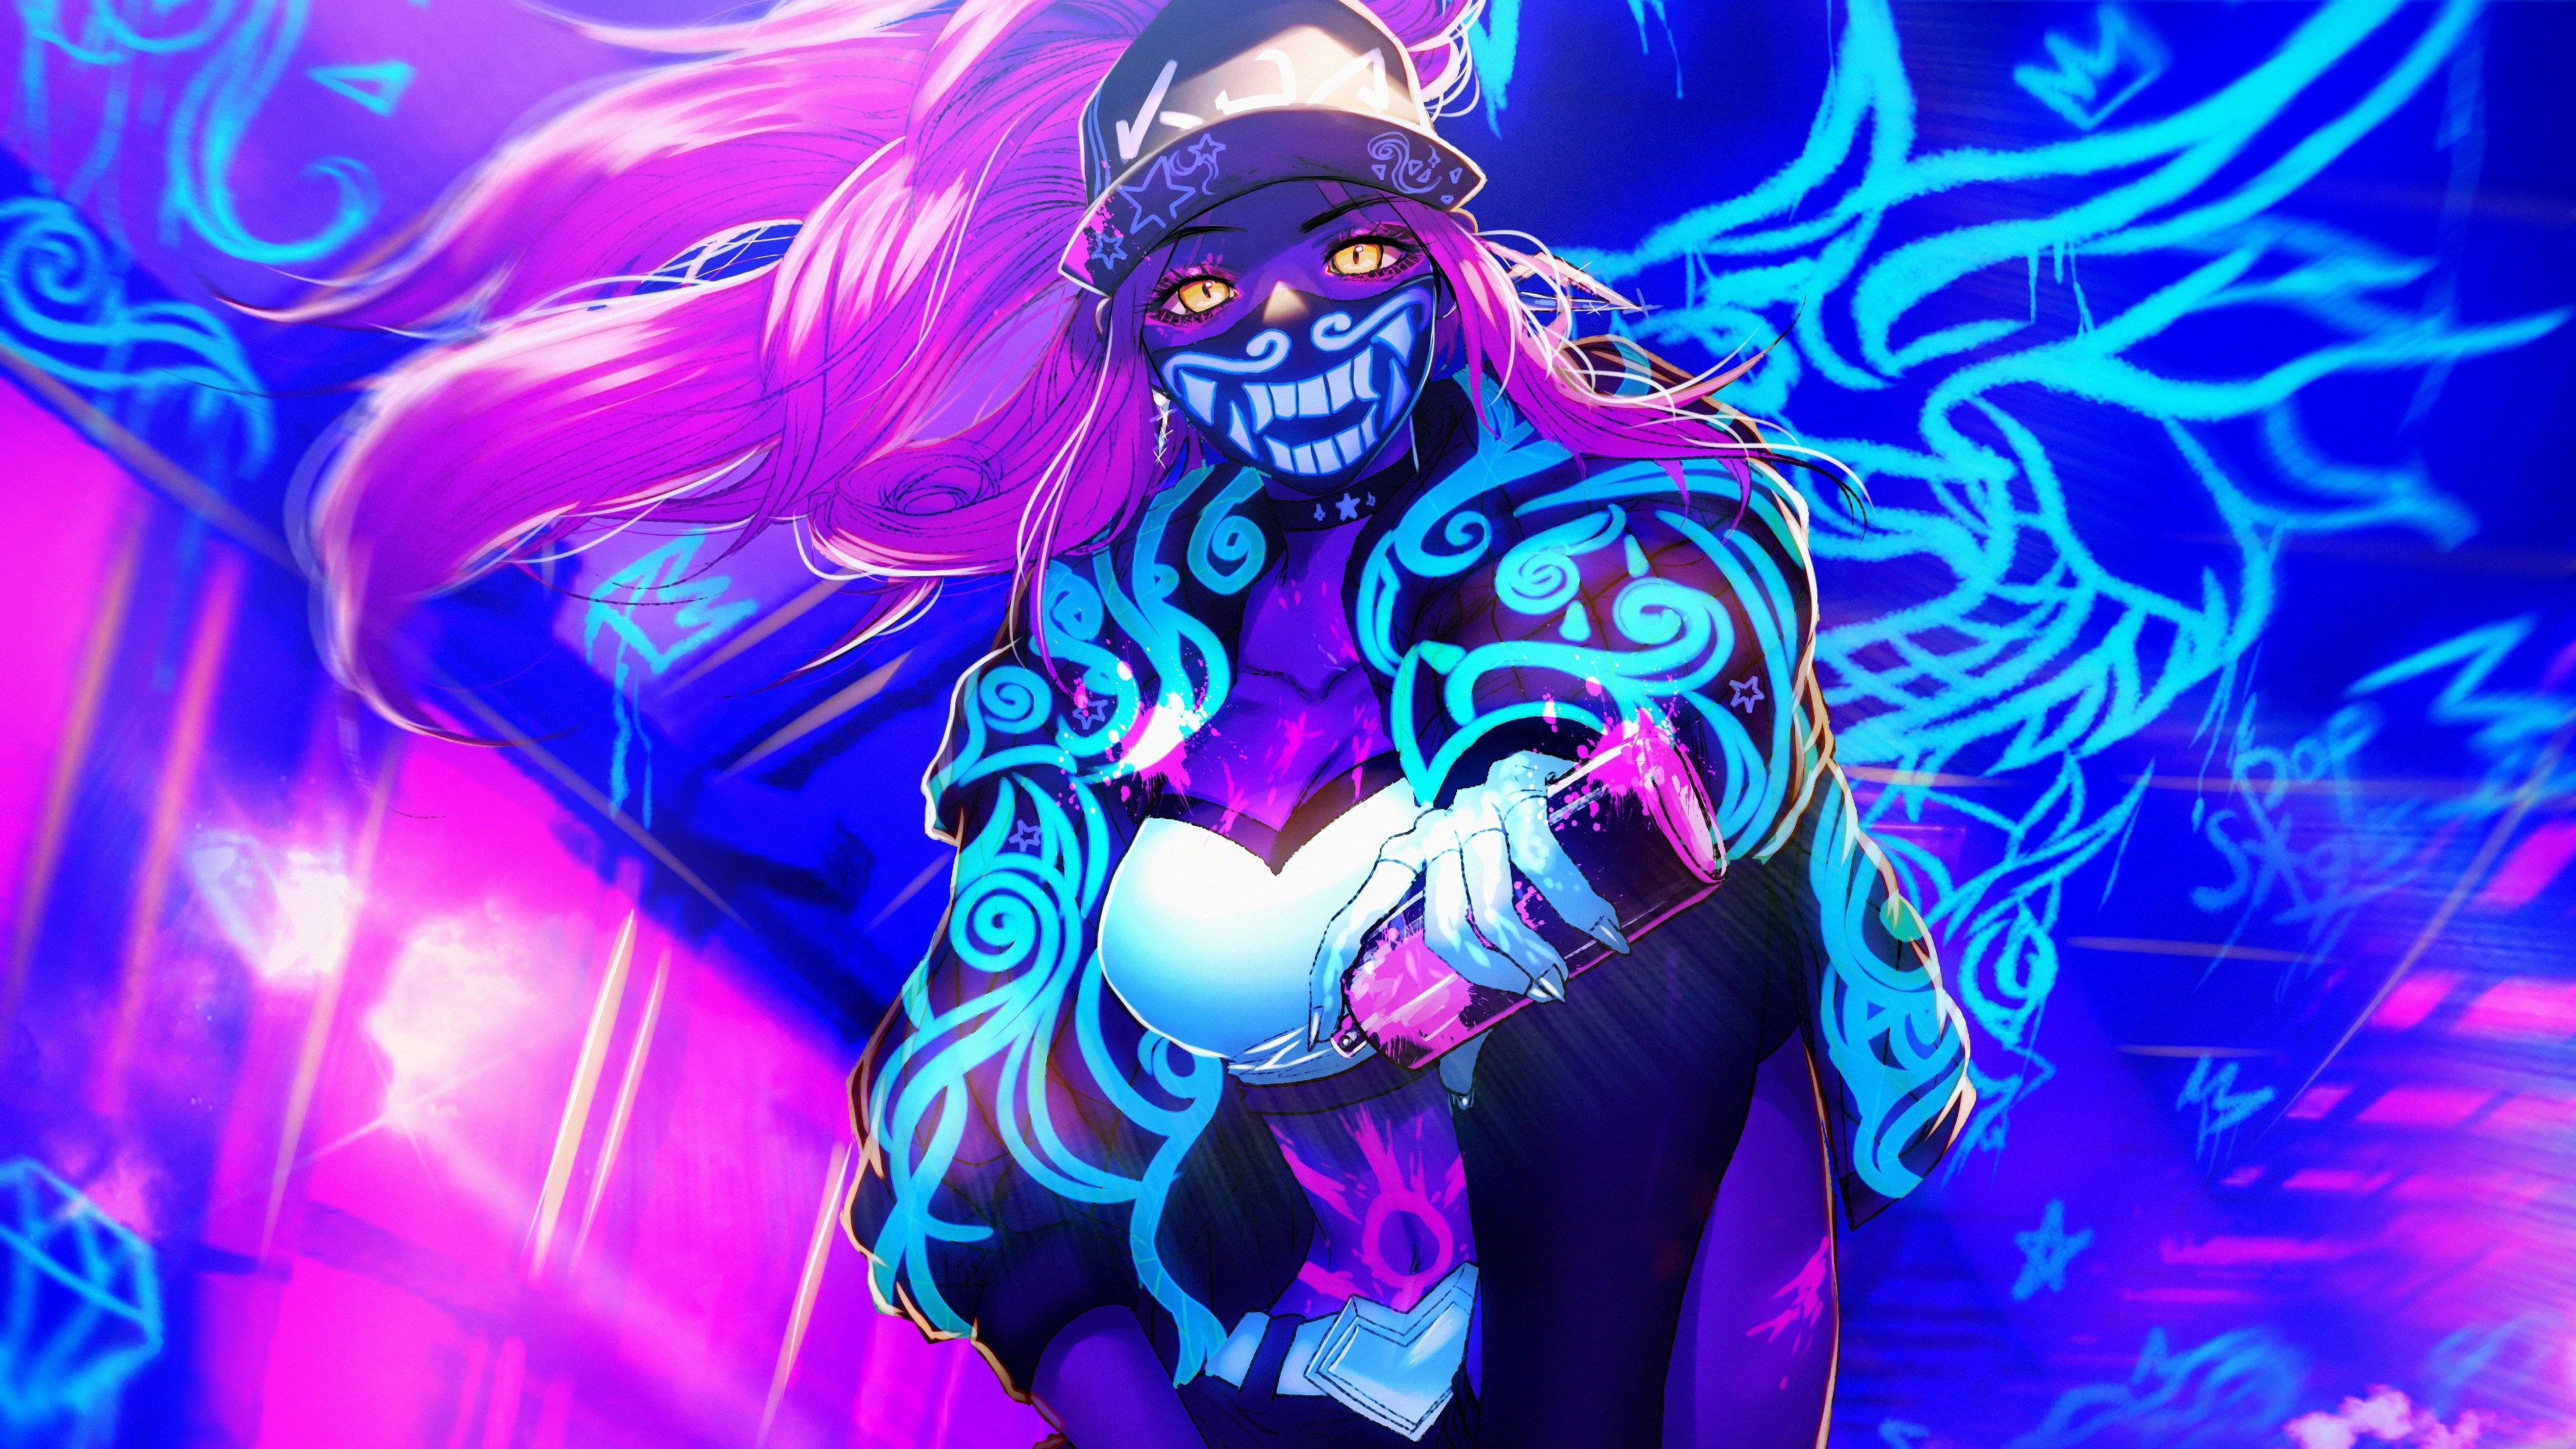 Kda Akali Wallpapers Hd posted by Zoey Cunningham.